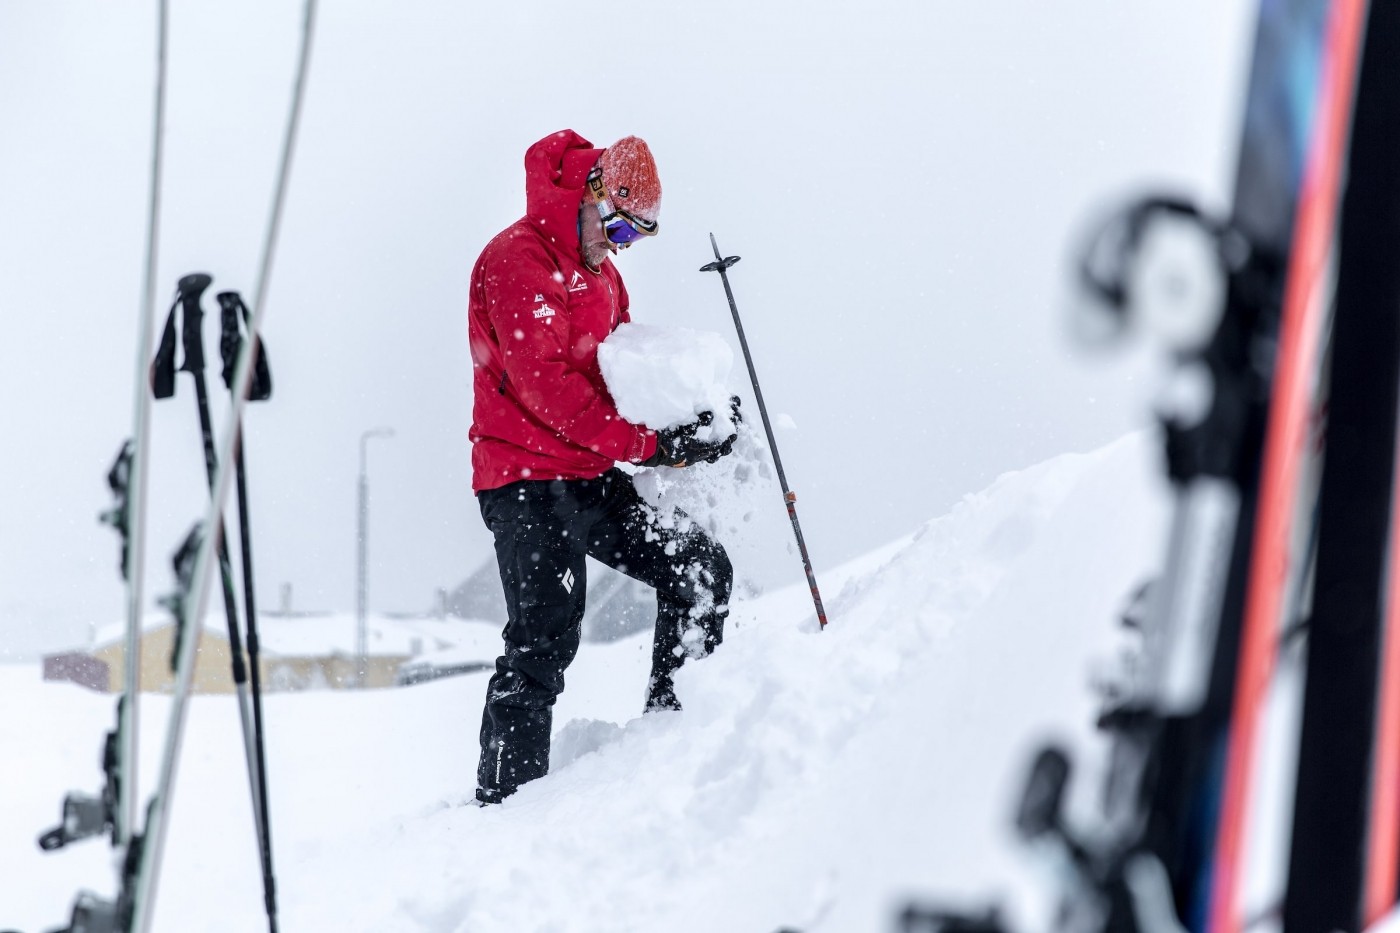 The ski touring guide checking snow conditions in Kuummiut in East Greenland. Photo by Mads Pihl - Visit Greenland